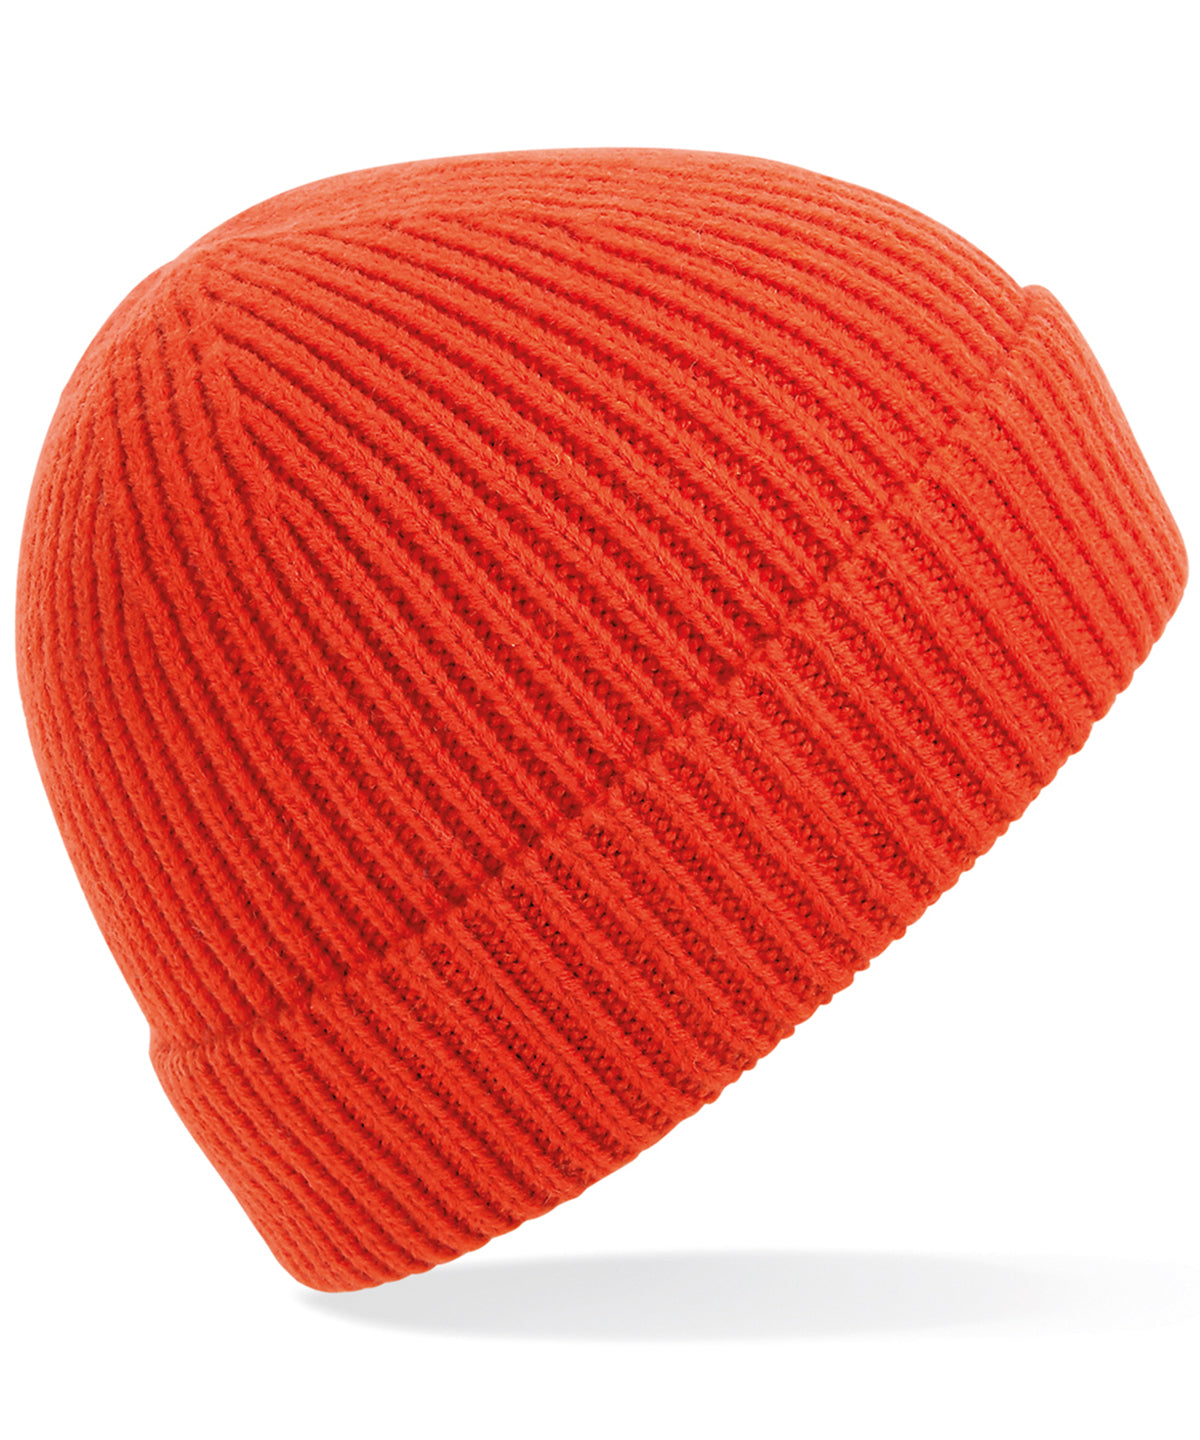 Personalised Hats - Mid Red Beechfield Engineered knit ribbed beanie